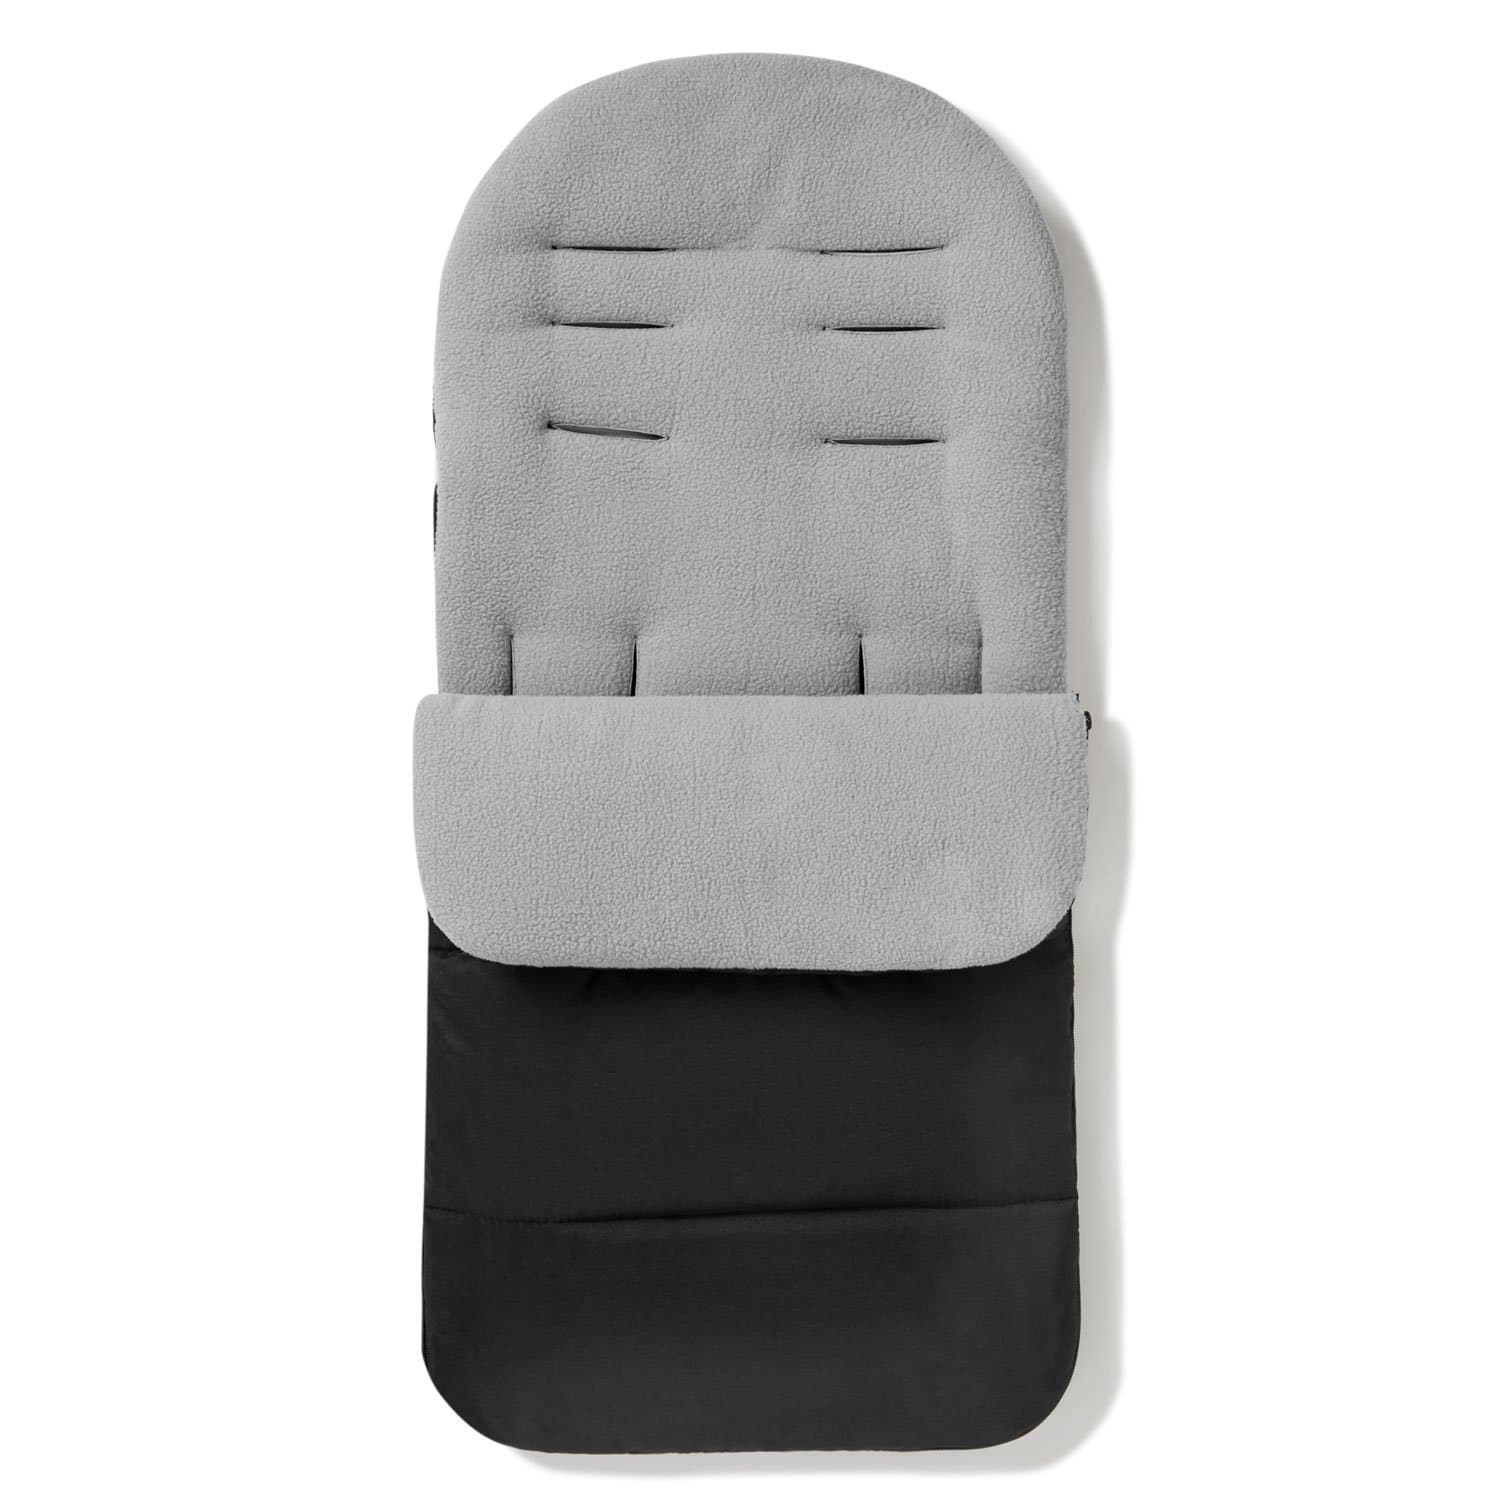 Premium Footmuff / Cosy Toes Compatible with Recaro - Dolphin Grey / Fits All Models | For Your Little One